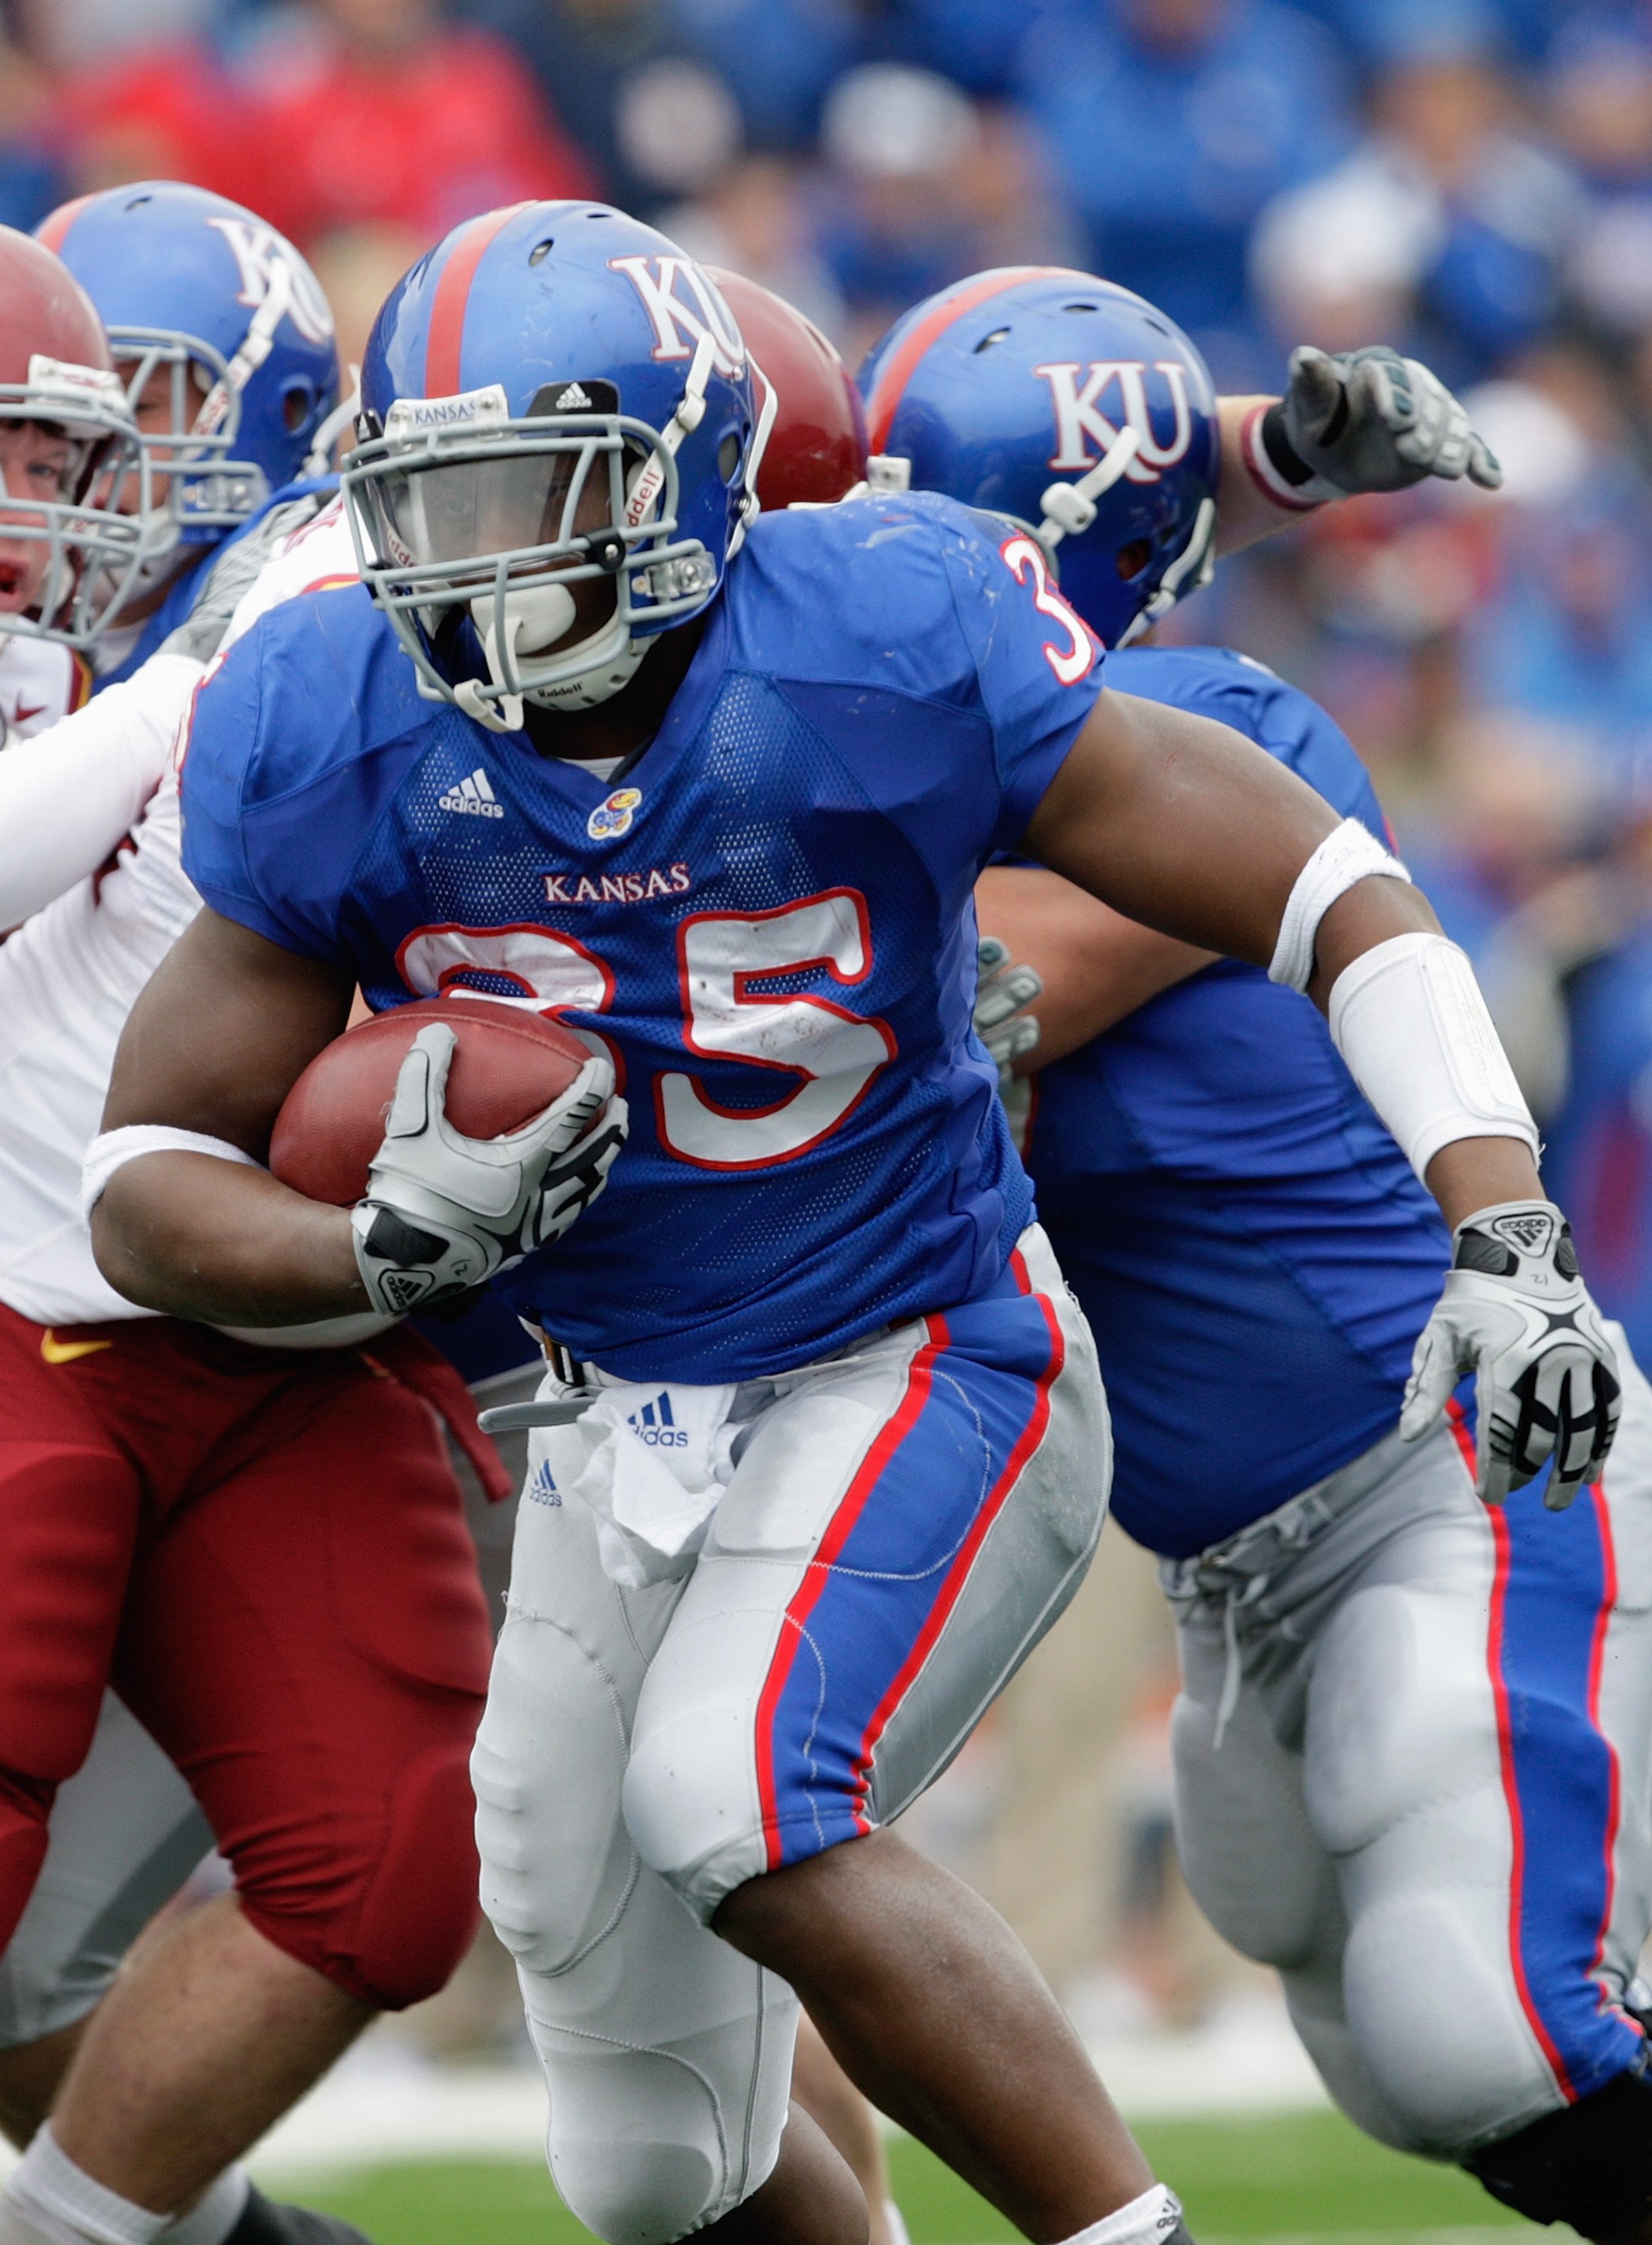 LAWRENCE, KS - OCTOBER 10:  Toben Opurum #35 of the Kansas Jayhawks runs with the ball during the game against the Iowa State Cyclones on October 10, 2009 at Memorial Stadium in Lawrence, Kansas. (Photo by Jamie Squire/Getty Images)